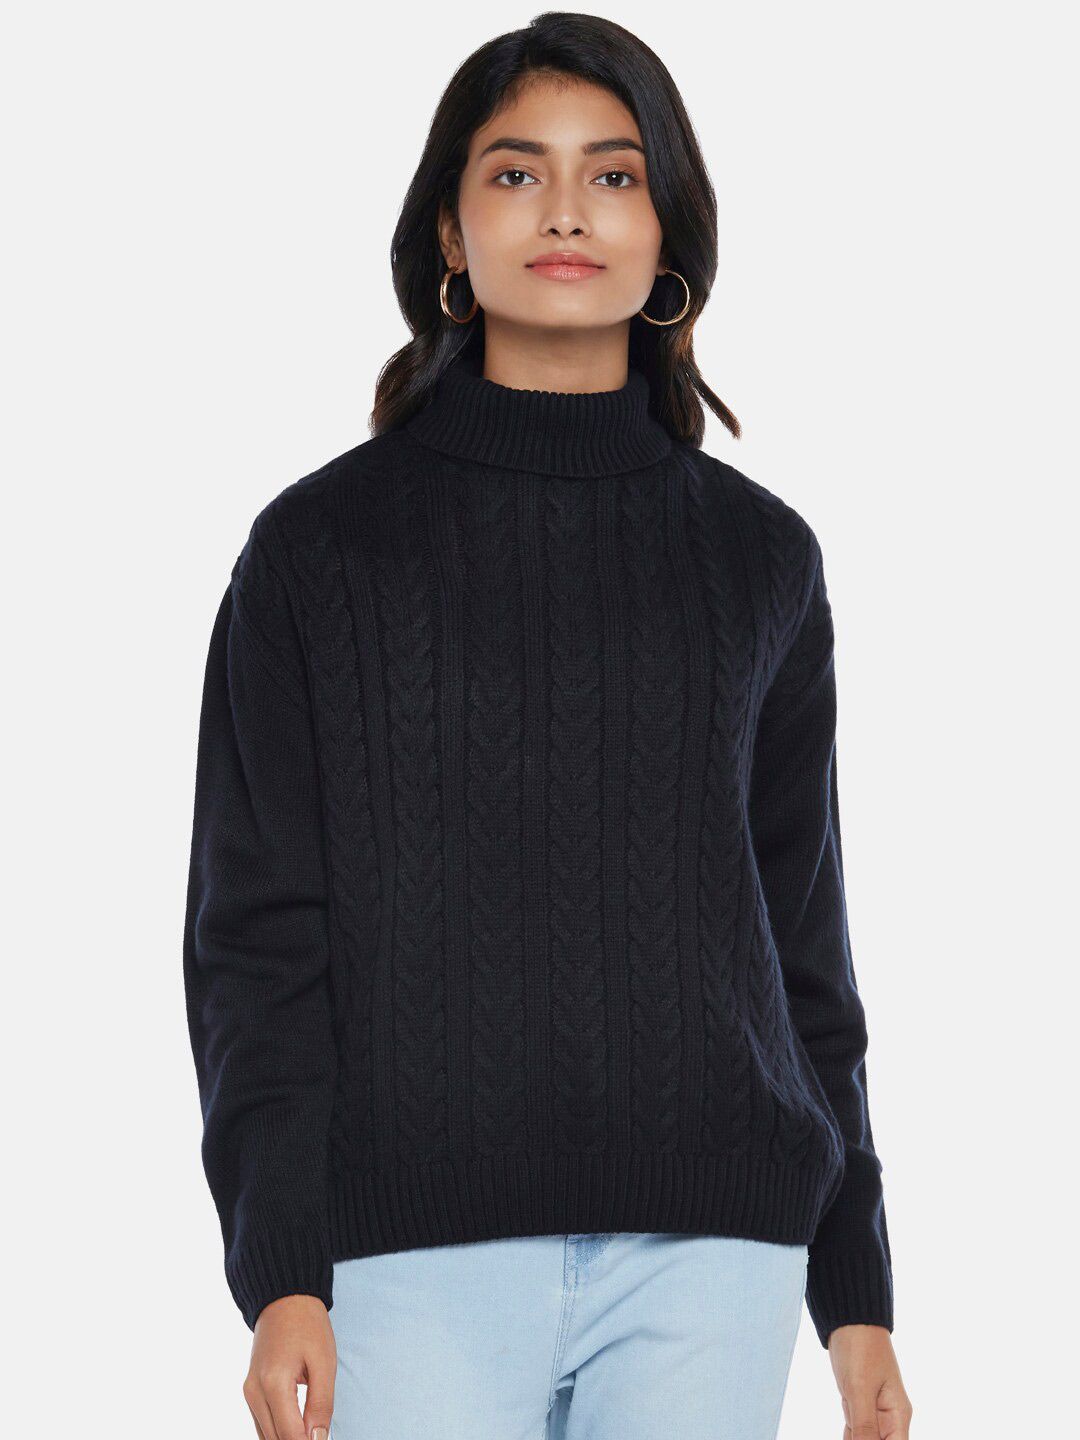 Honey by Pantaloons Women Navy Blue Cable Knit Pullover Sweater Price in India